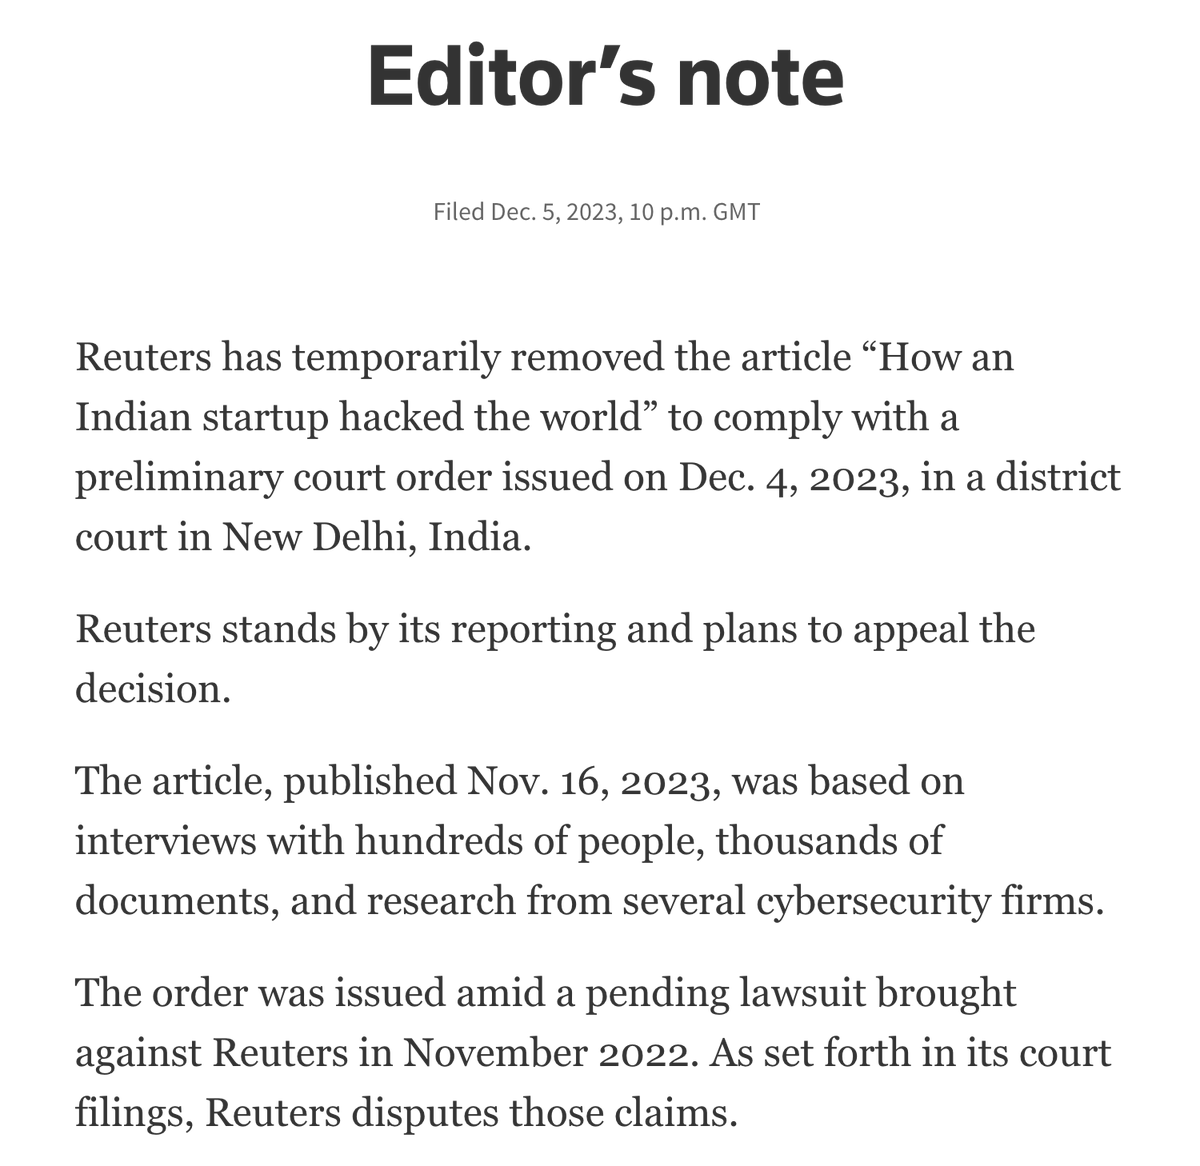 Today is Press Freedom Day. A reminder that on 12/3/2013, an exposed Indian hack-for-hire firm used a foreign court to *censor* US investigative reporters writing for the US public about US (and other) victims. Reuters killed the story—no US politician has done anything about it.